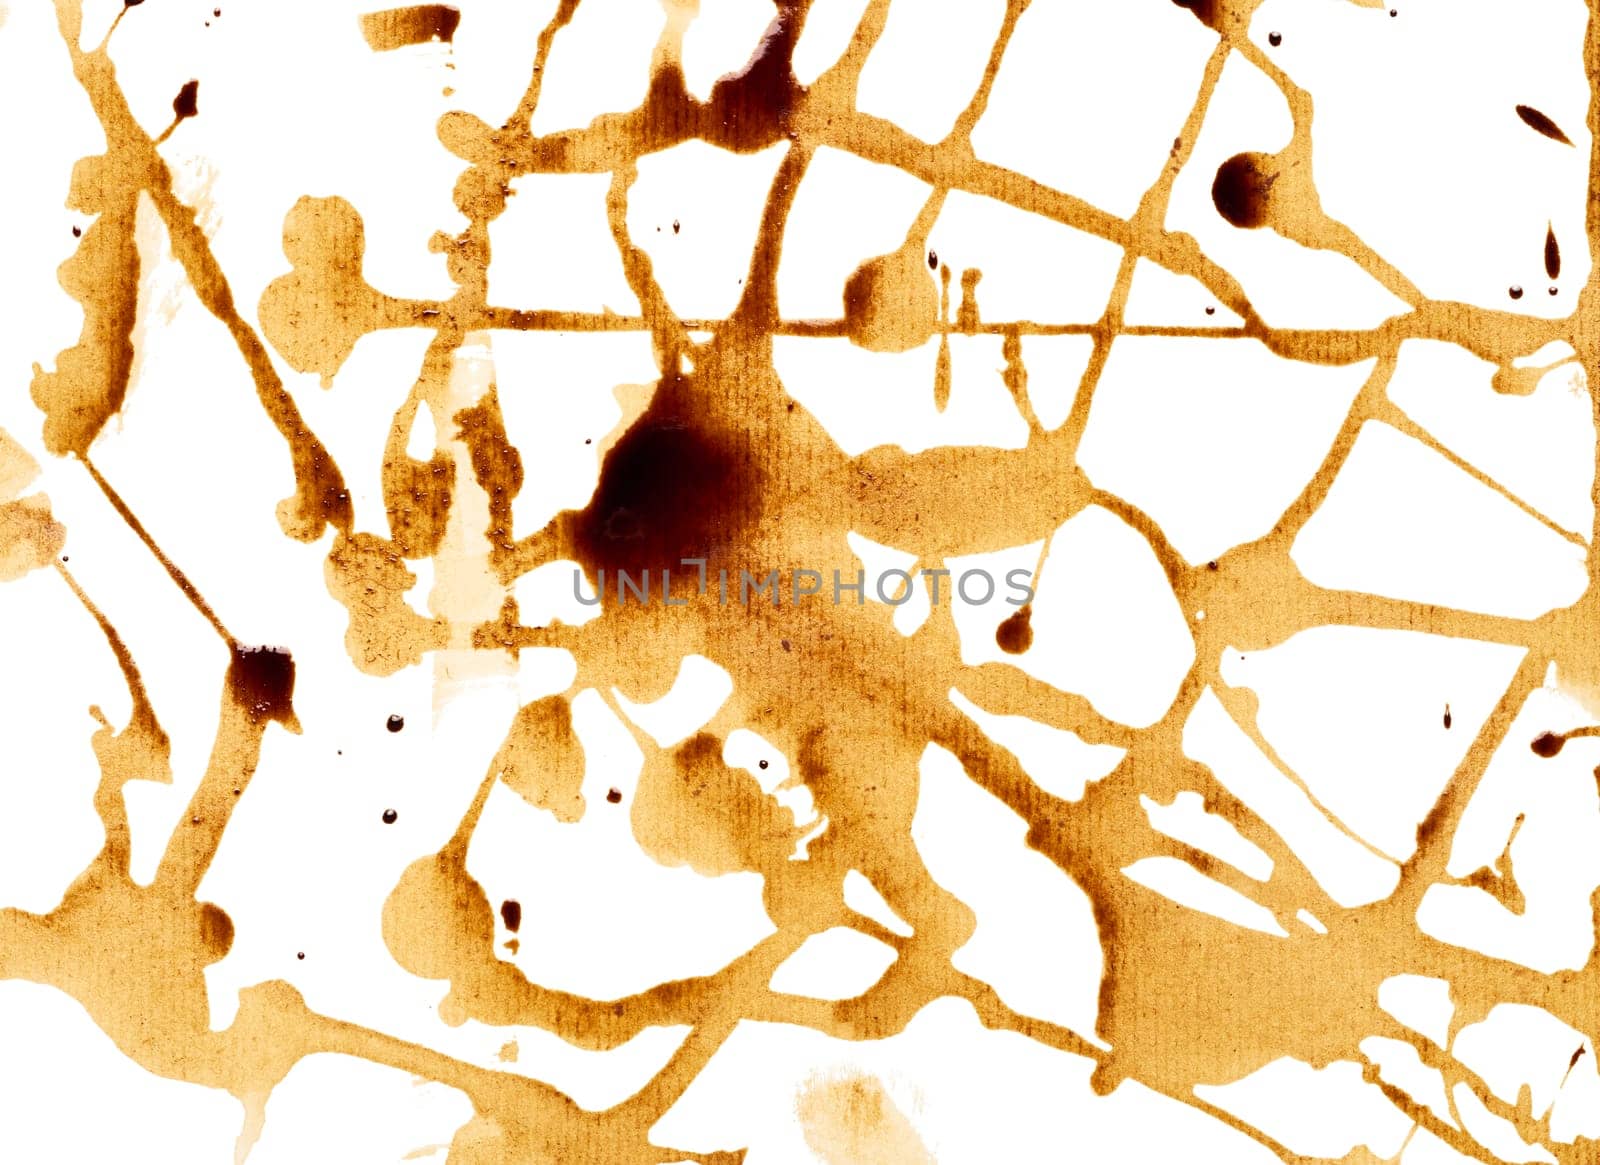 Spilled black coffee, splashes on a white background, close up